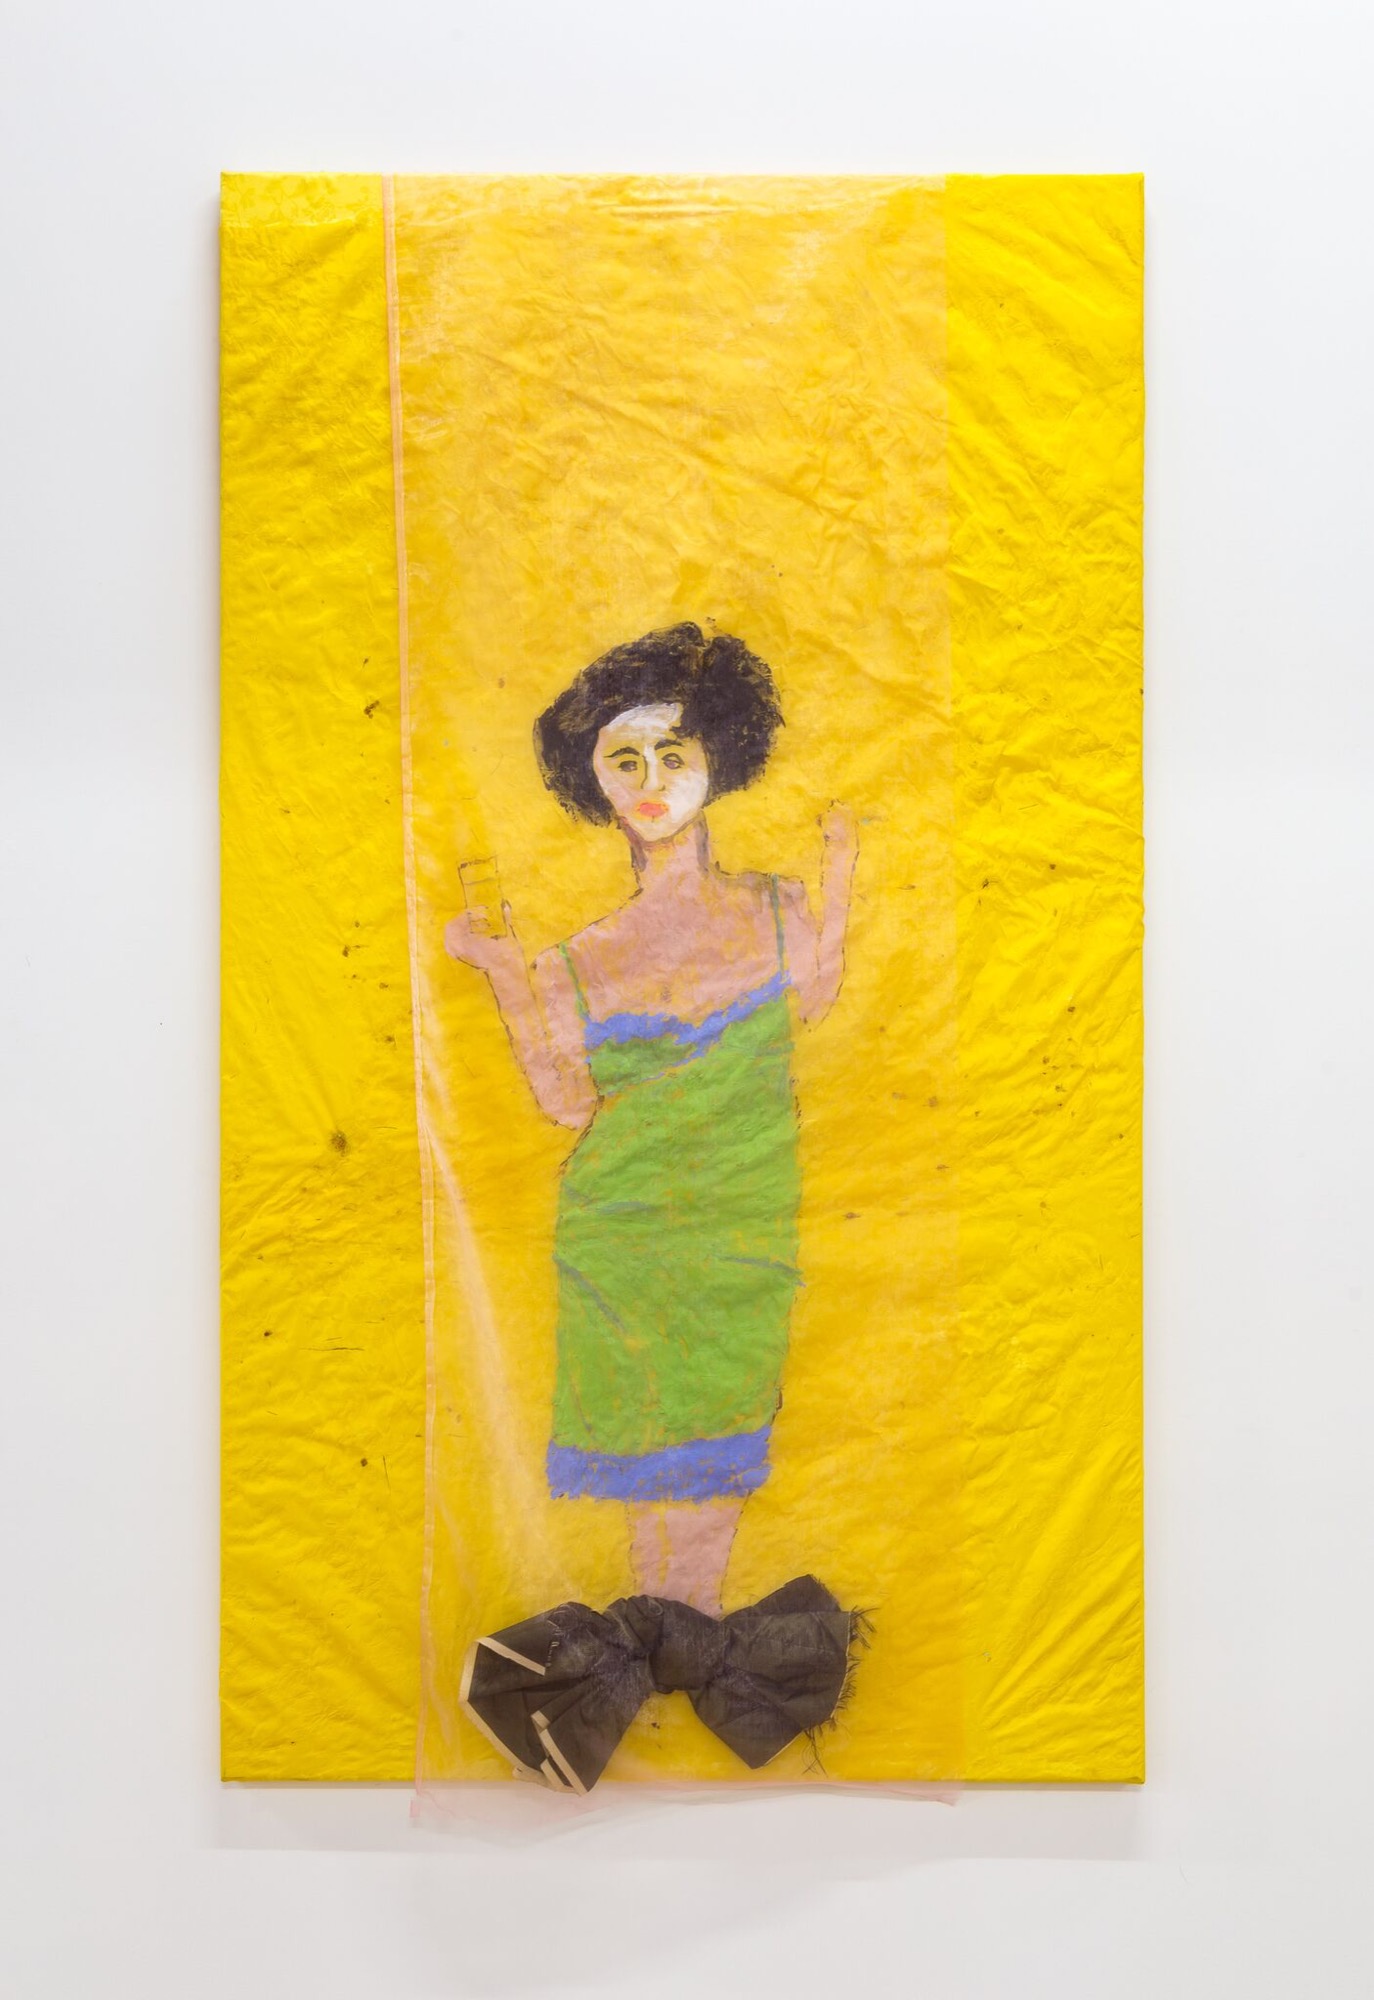 Jenny Watson, <em>Elizabeth Taylor in &#39;Butterfield 8&#39; on Buttercup Yellow</em>, 2011, Liquitex acrylic on silk, organza overlay, shantung bow. Courtesy the artist and Anna Schwartz Gallery, Melbourne. Photo: André Piguet.